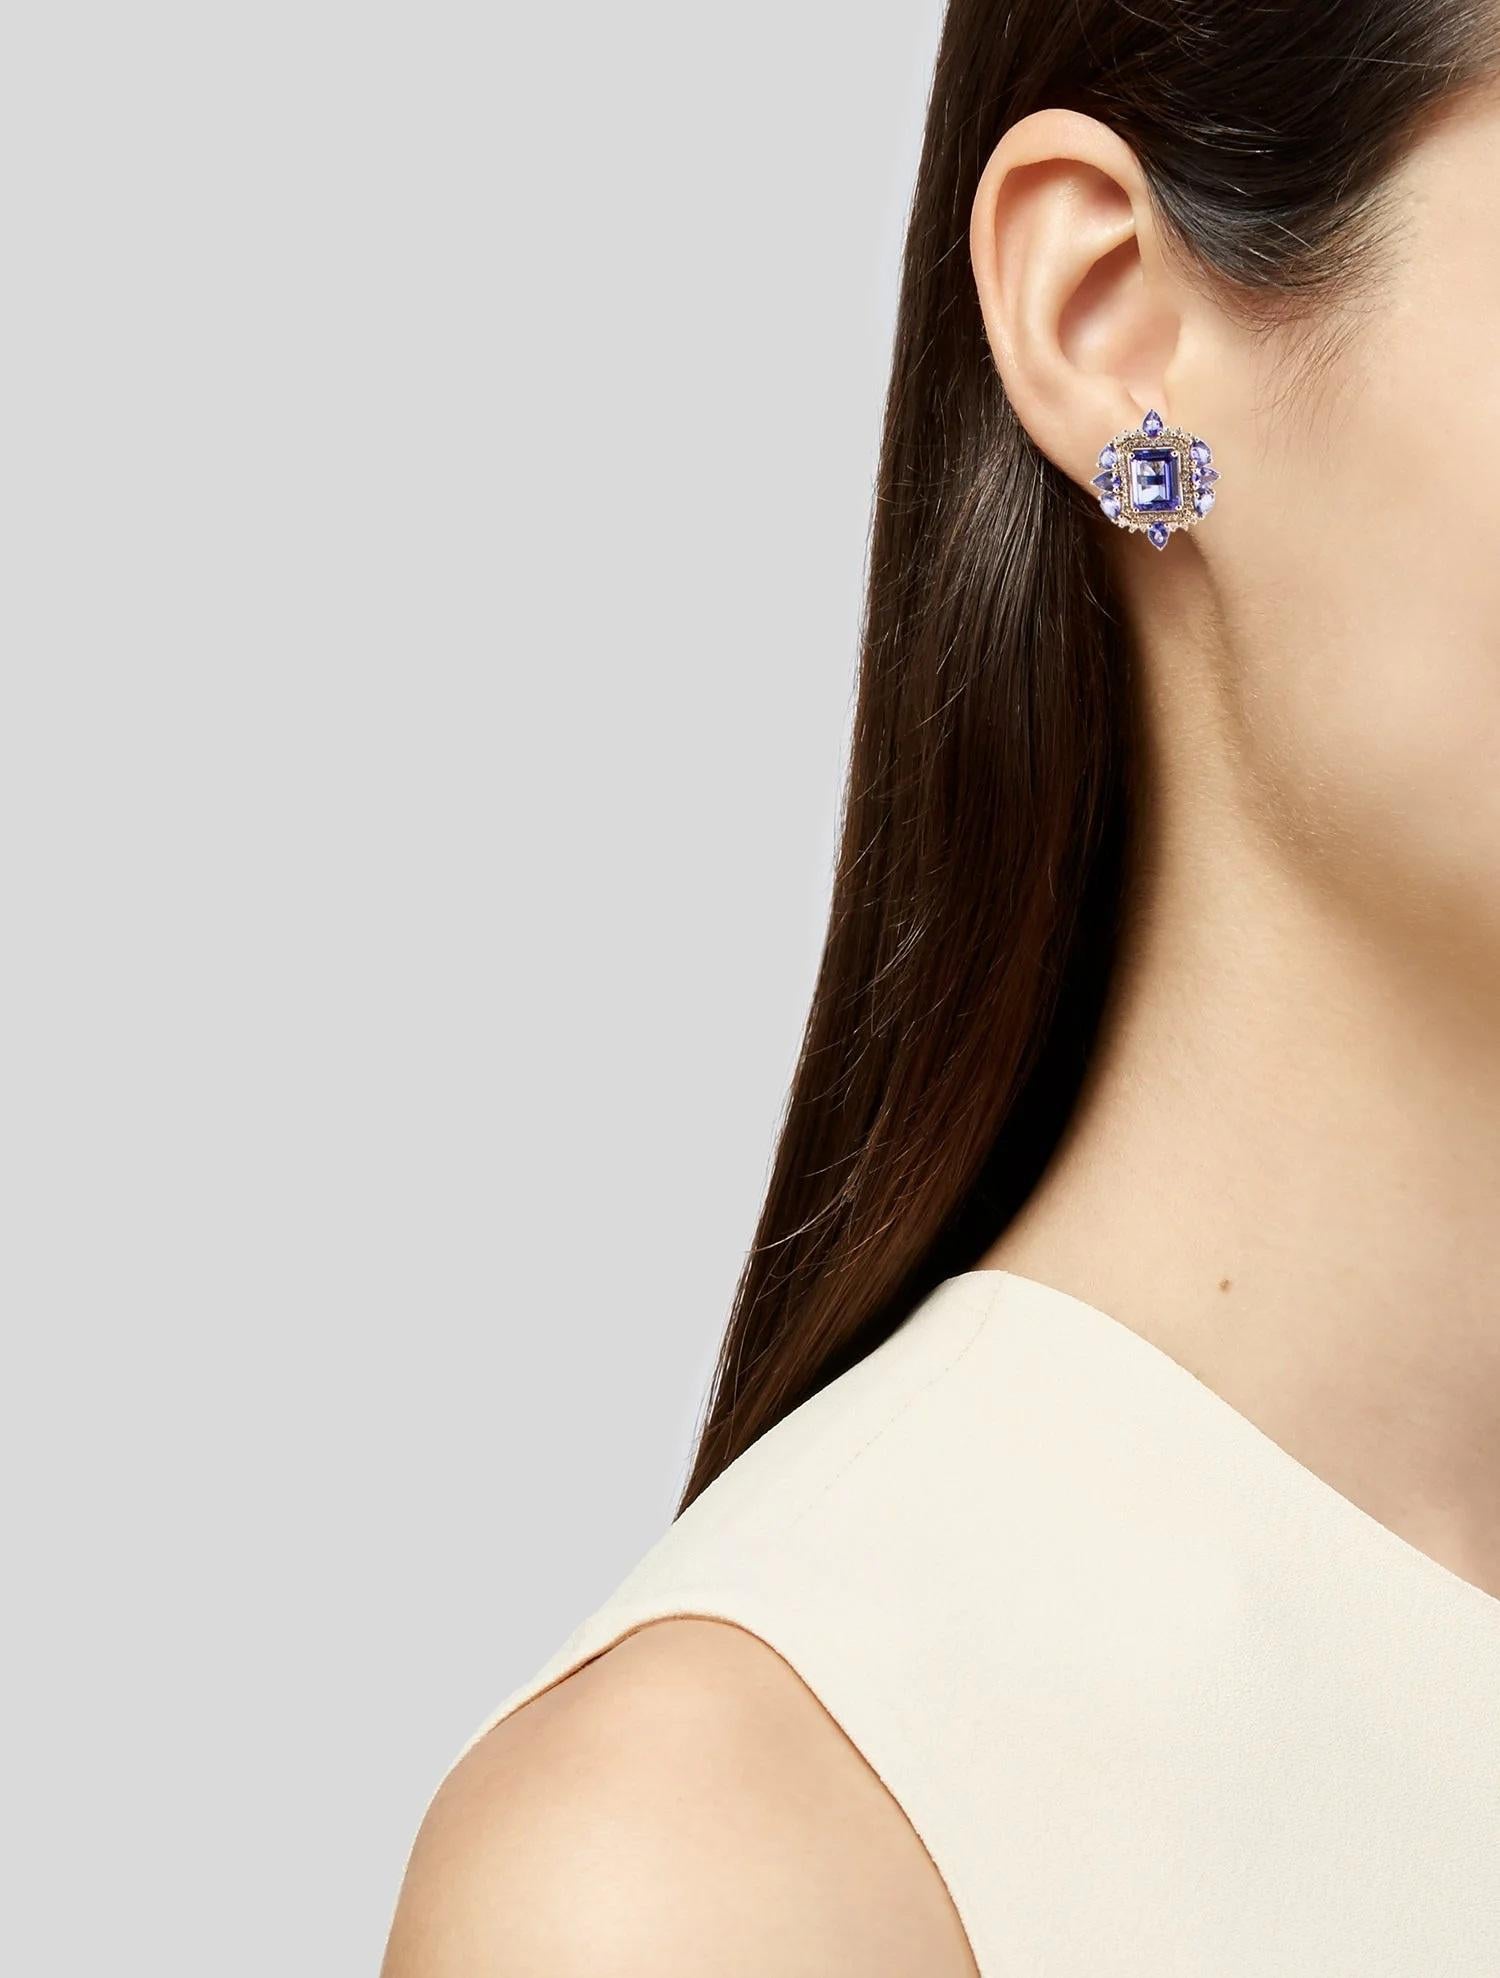 Elevate your look with these stunning 14K Yellow Gold Tanzanite & Diamond Earrings. Featuring a total of 6.60 carats of vibrant purple tanzanite stones, including cut cornered rectangular step cut and pear modified brilliant shapes, these earrings